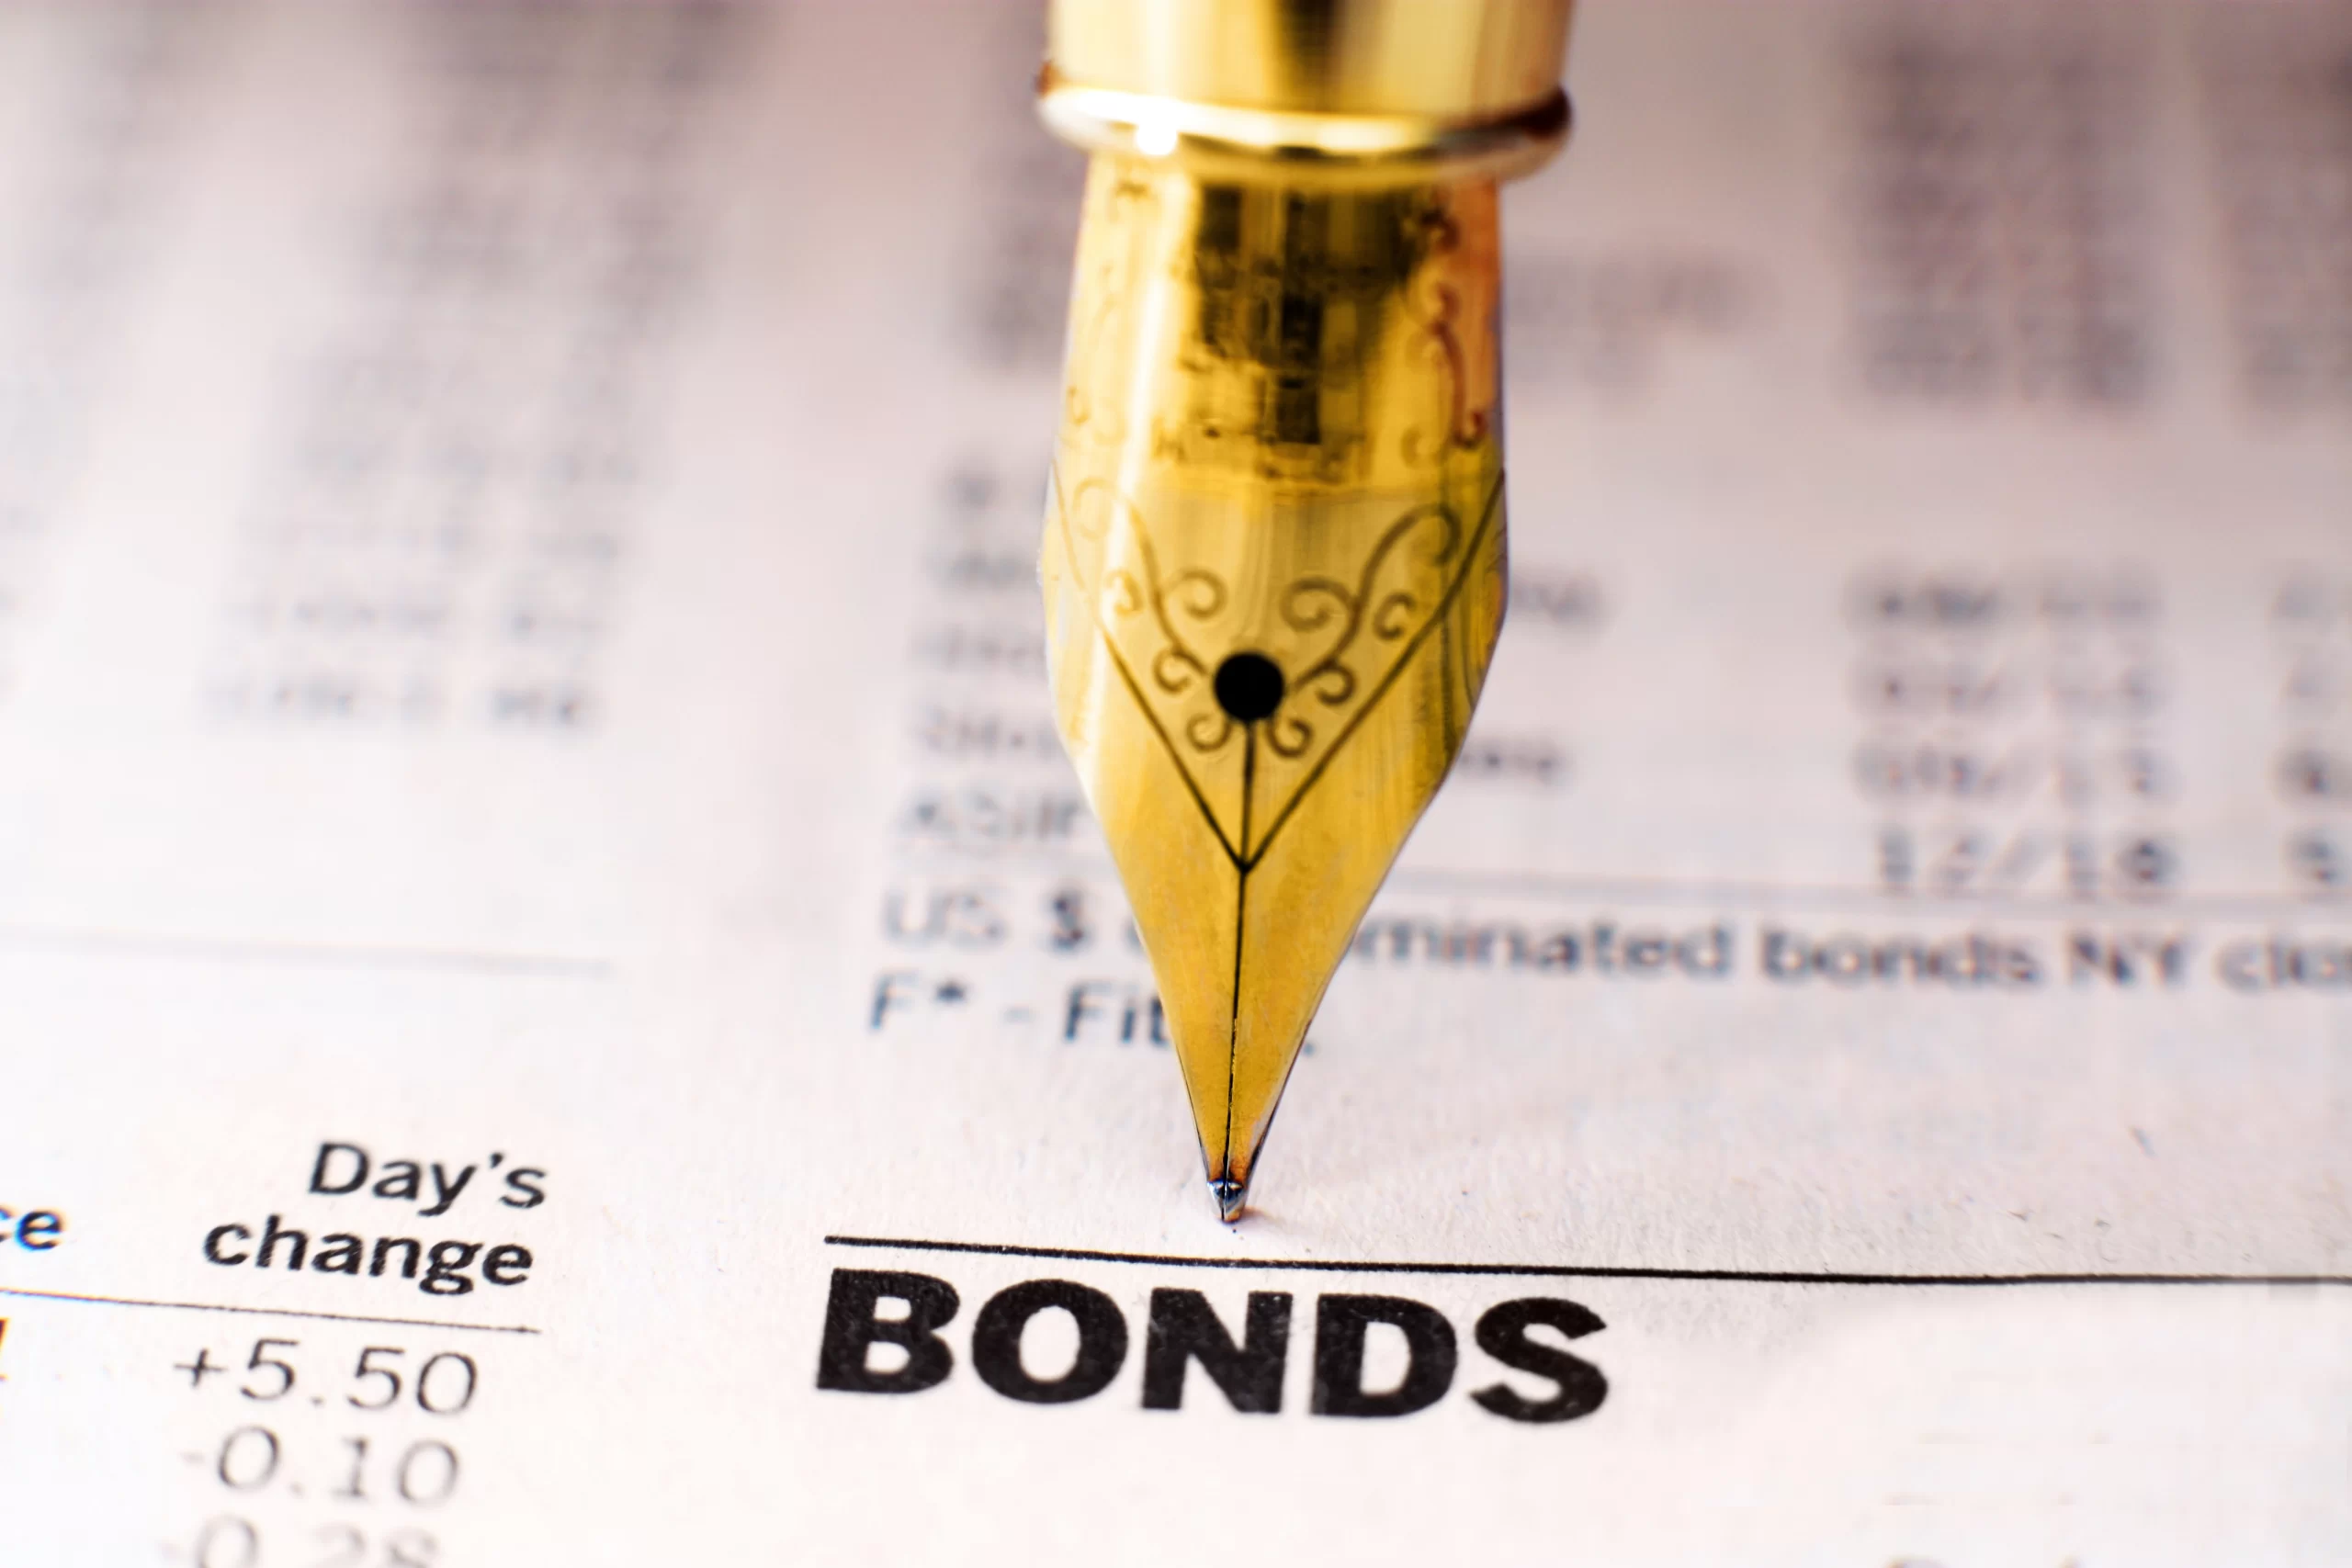 A gold pen on a paper with bolded BOND word indicating investing in bonds